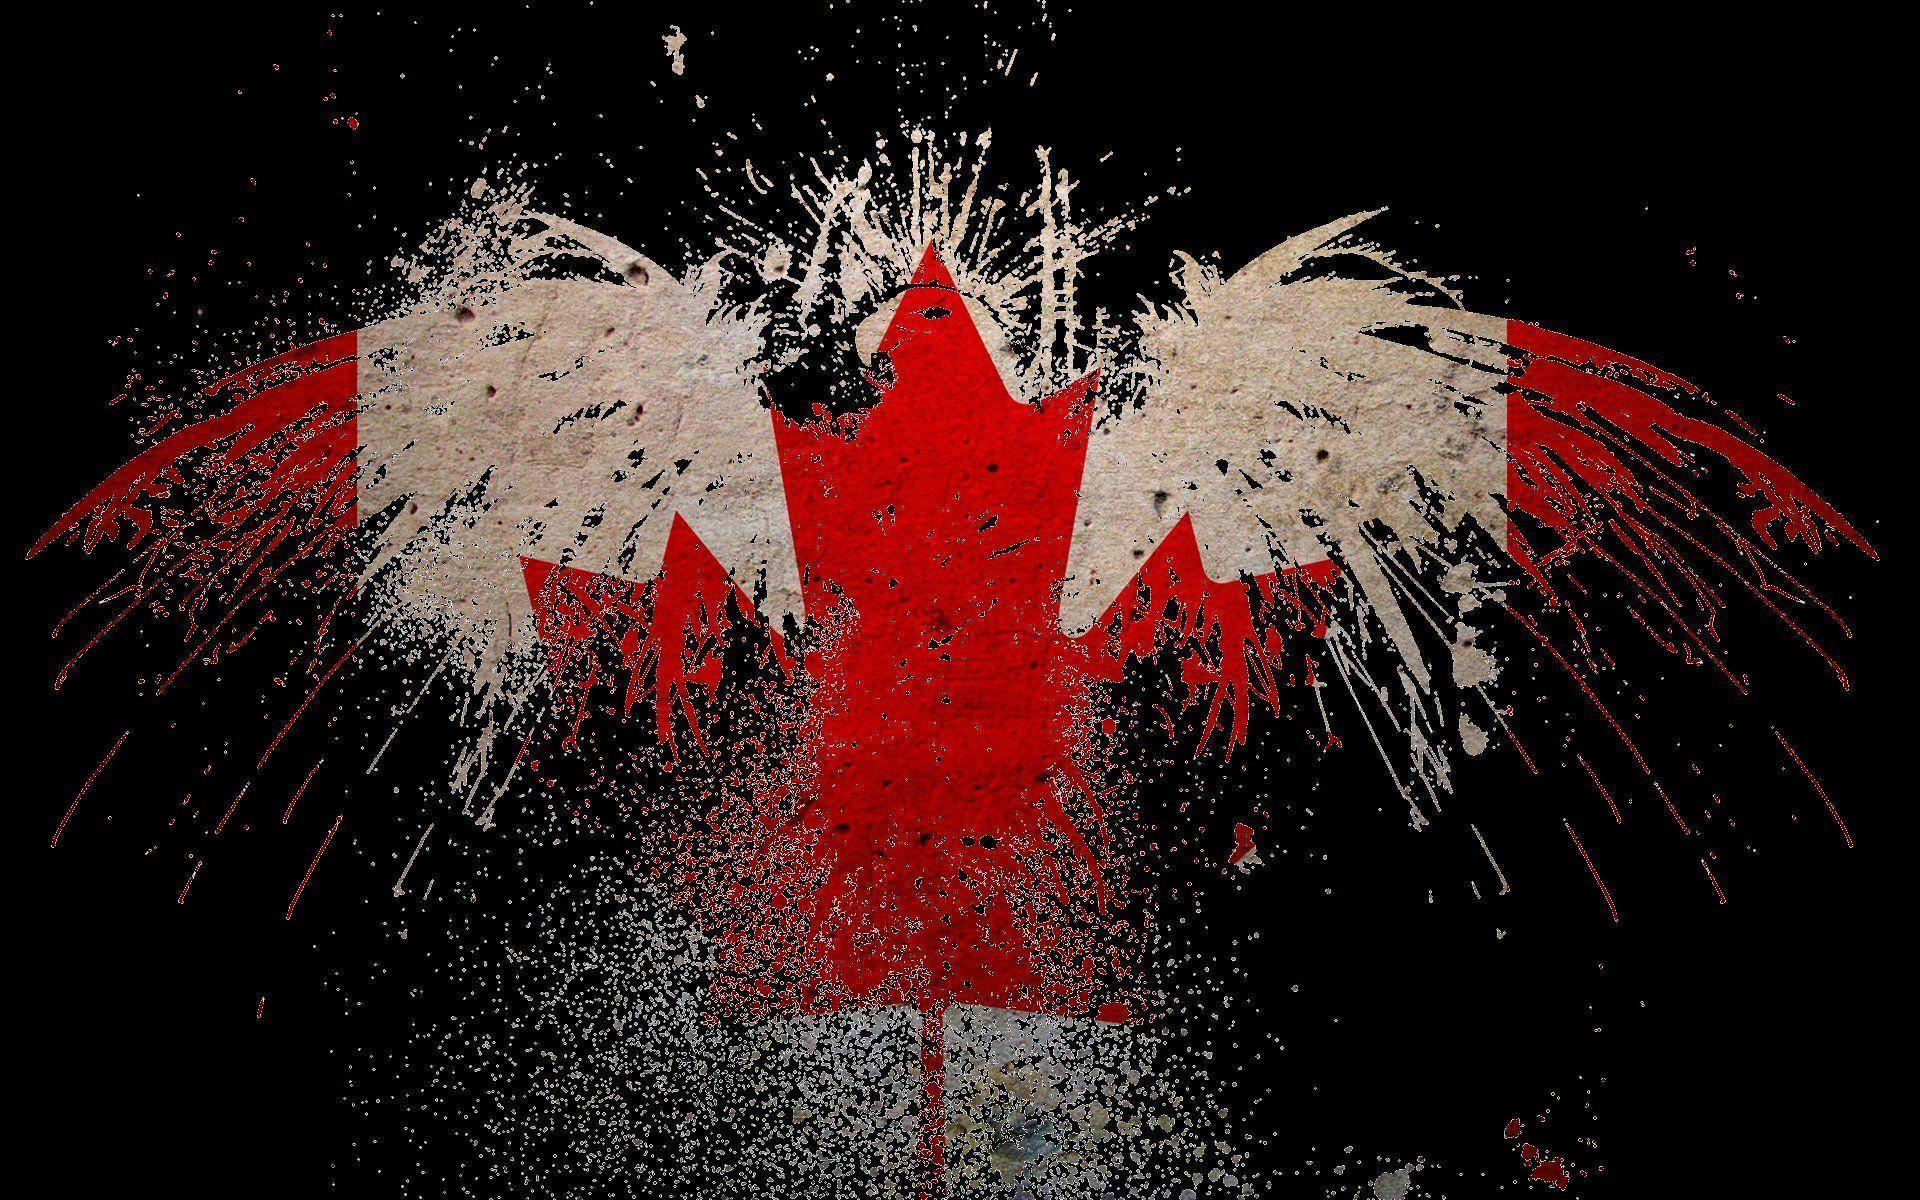 Canadian Flag Wallpapers Wallpaper Cave